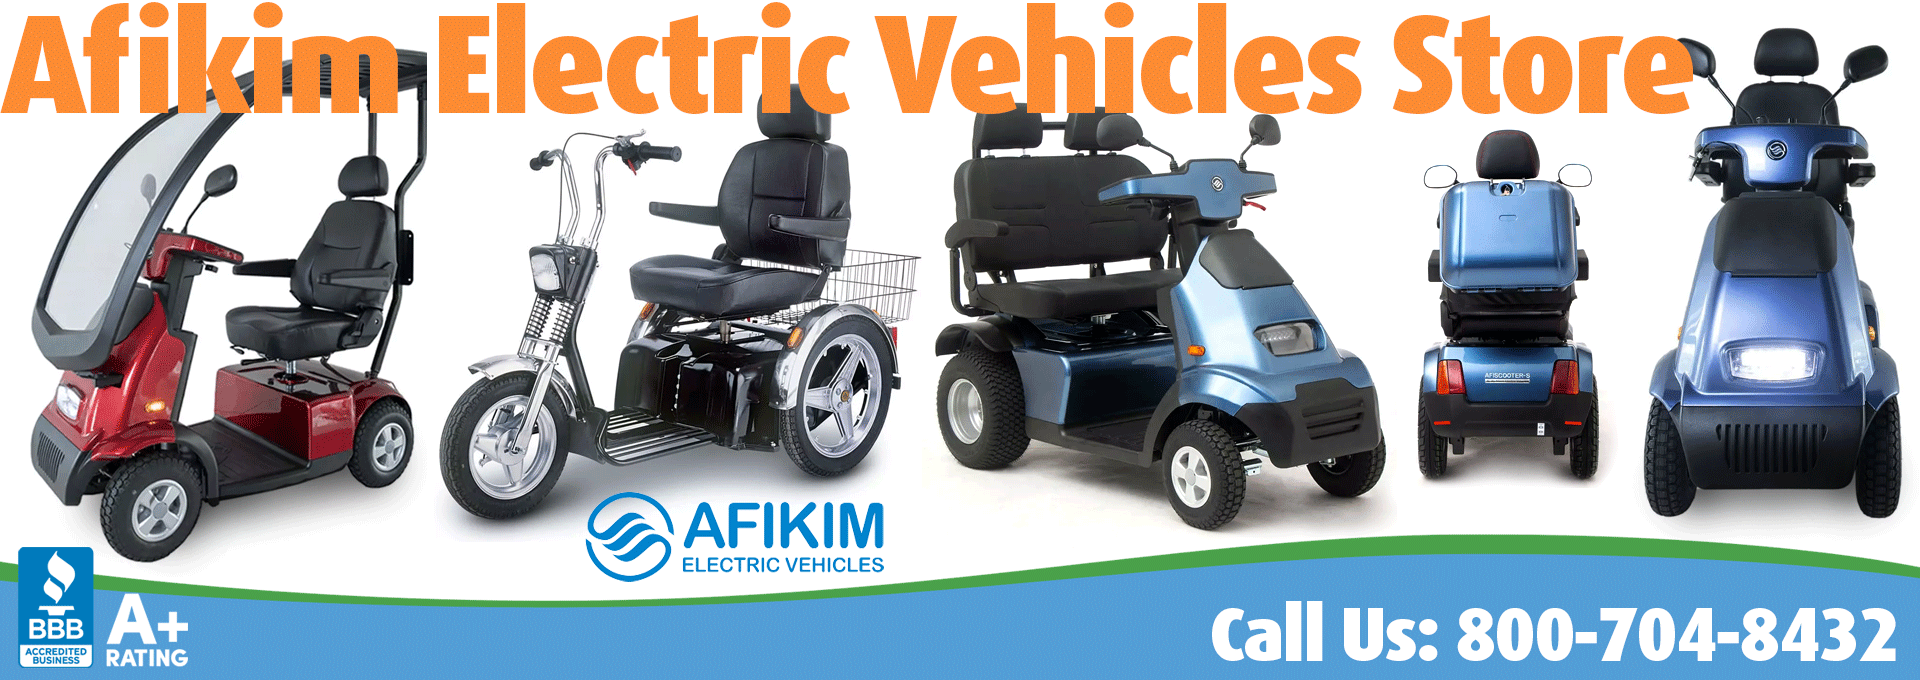 Living Well Stores: The Best Mobility products from Afikim Electric Vehicles